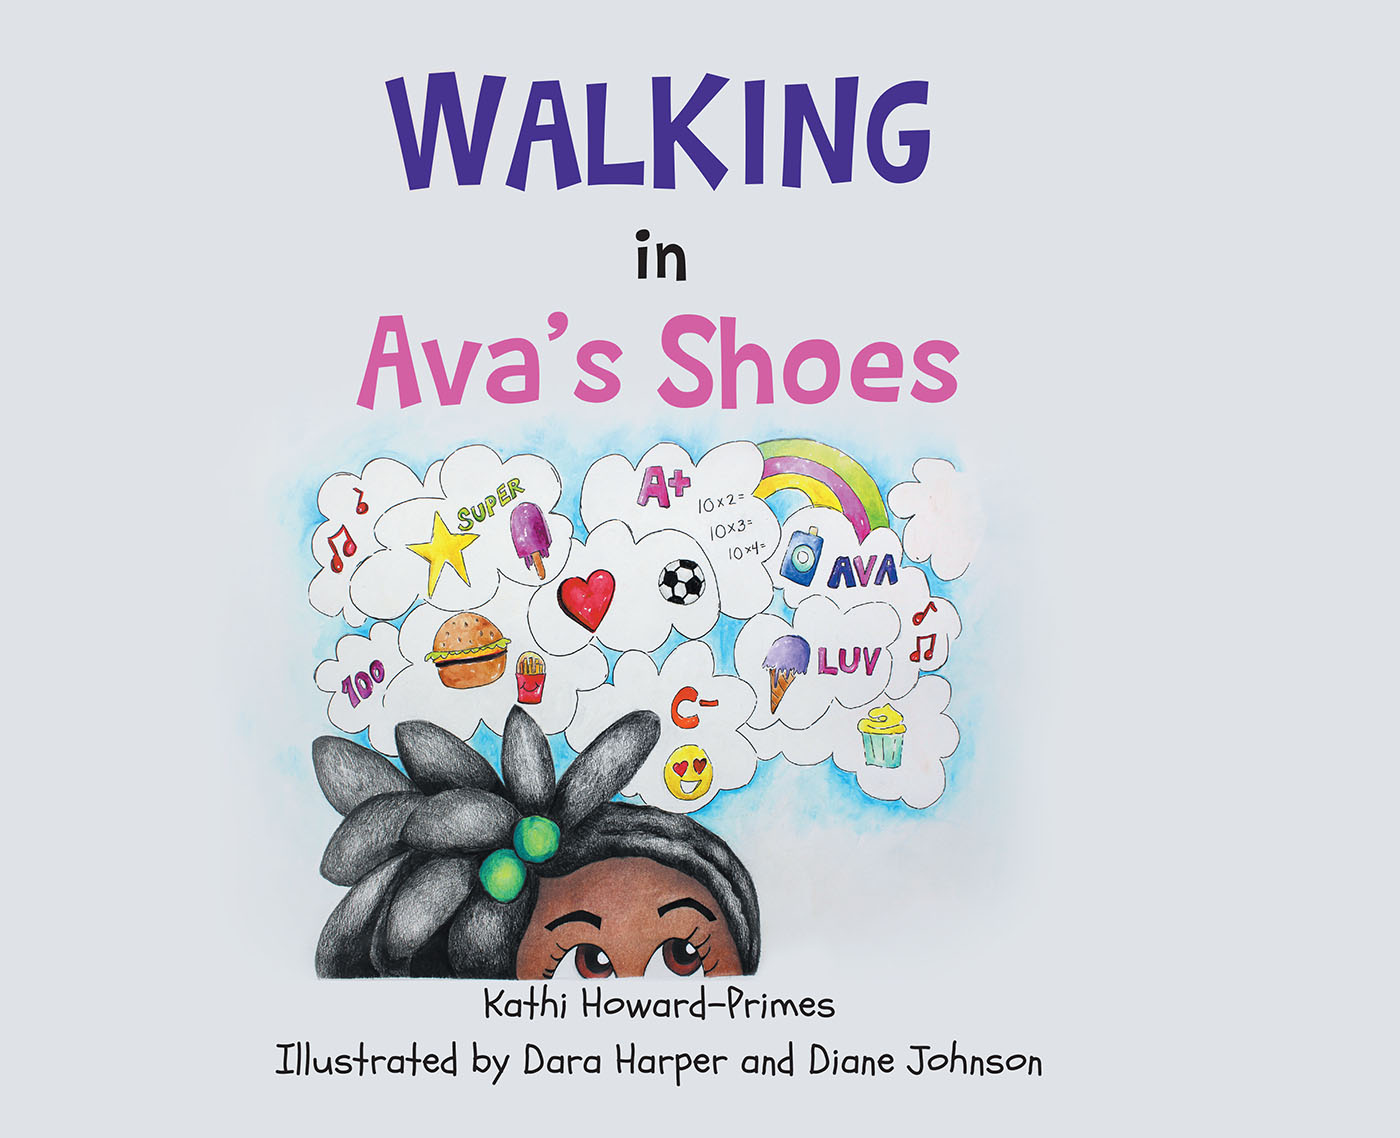 Kathi Howard-Primes’s Newly Released "Walking in Ava’s Shoes" is a Compassionate Story of a Young Girl Living with Attention Deficit Hyperactivity Disorder (ADHD)